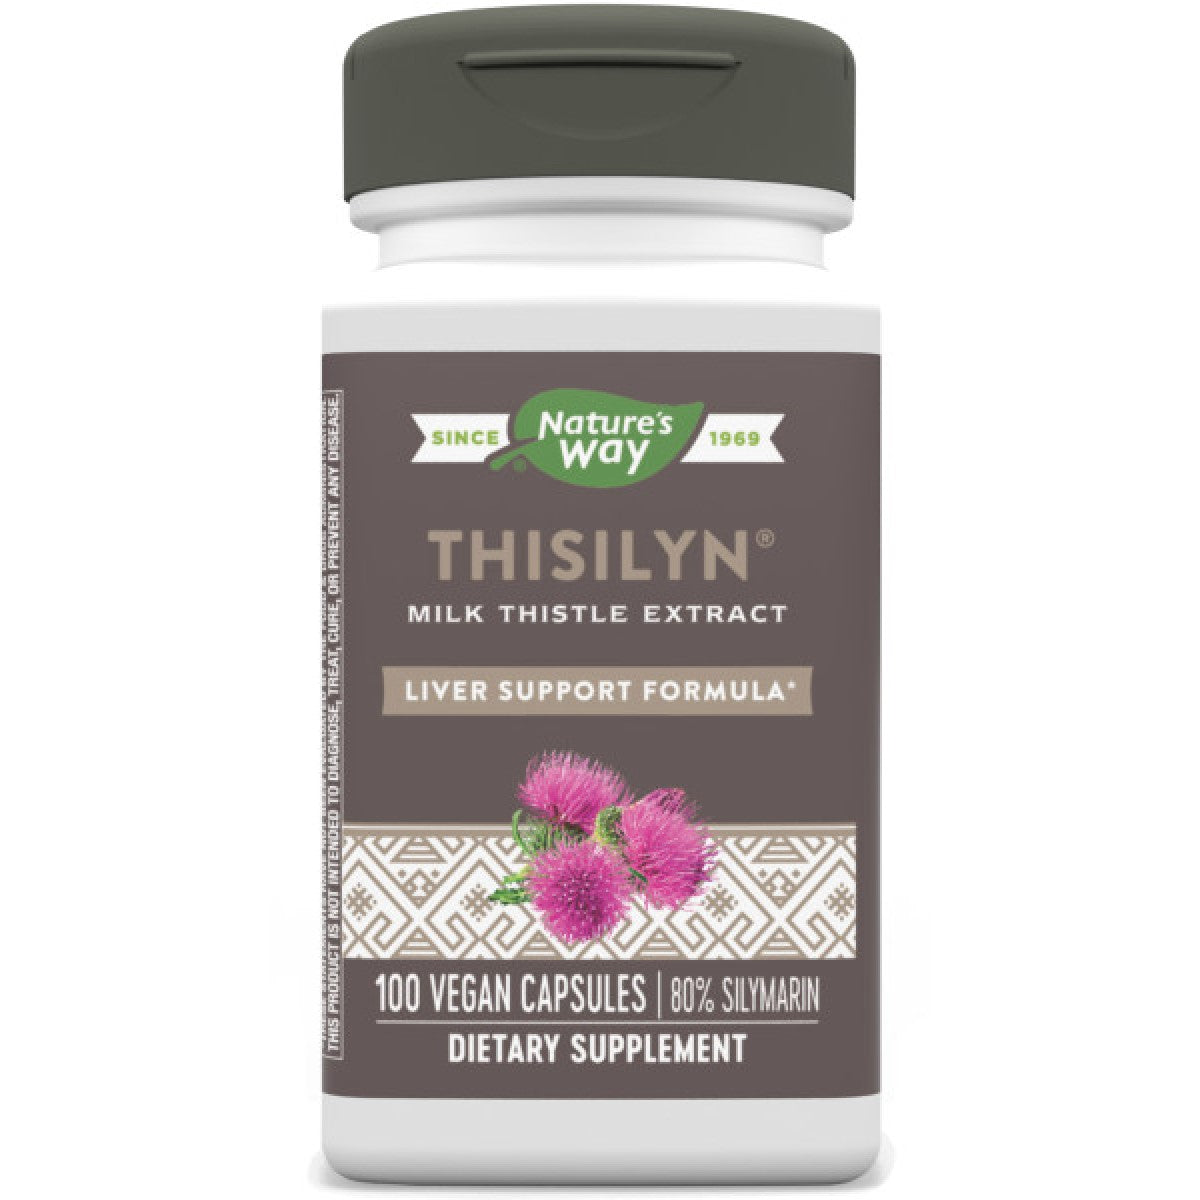 Primary image of Thisilyn Standardized Milk Thistle Extract